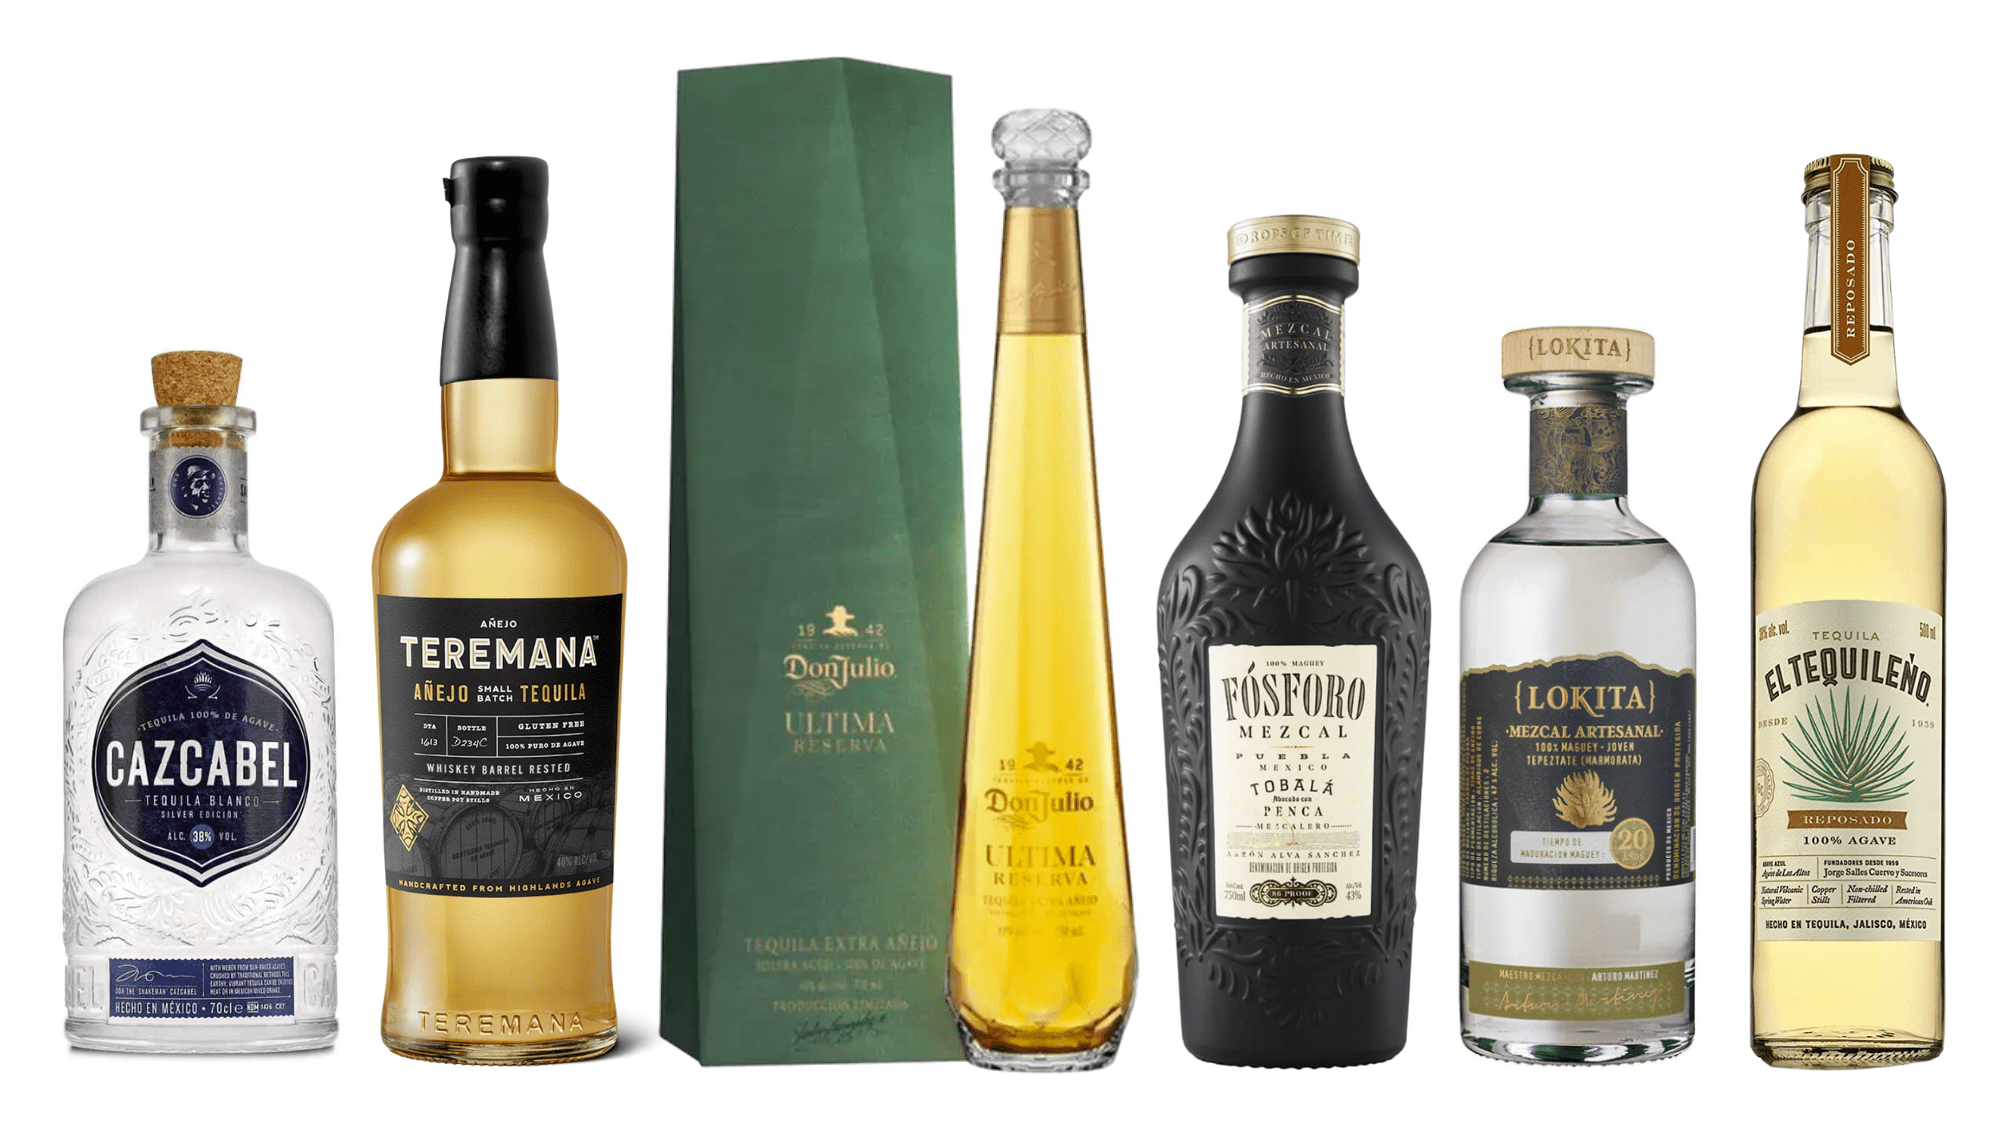 Top 10 award-winning Tequilas and mezcals - The Spirits Business